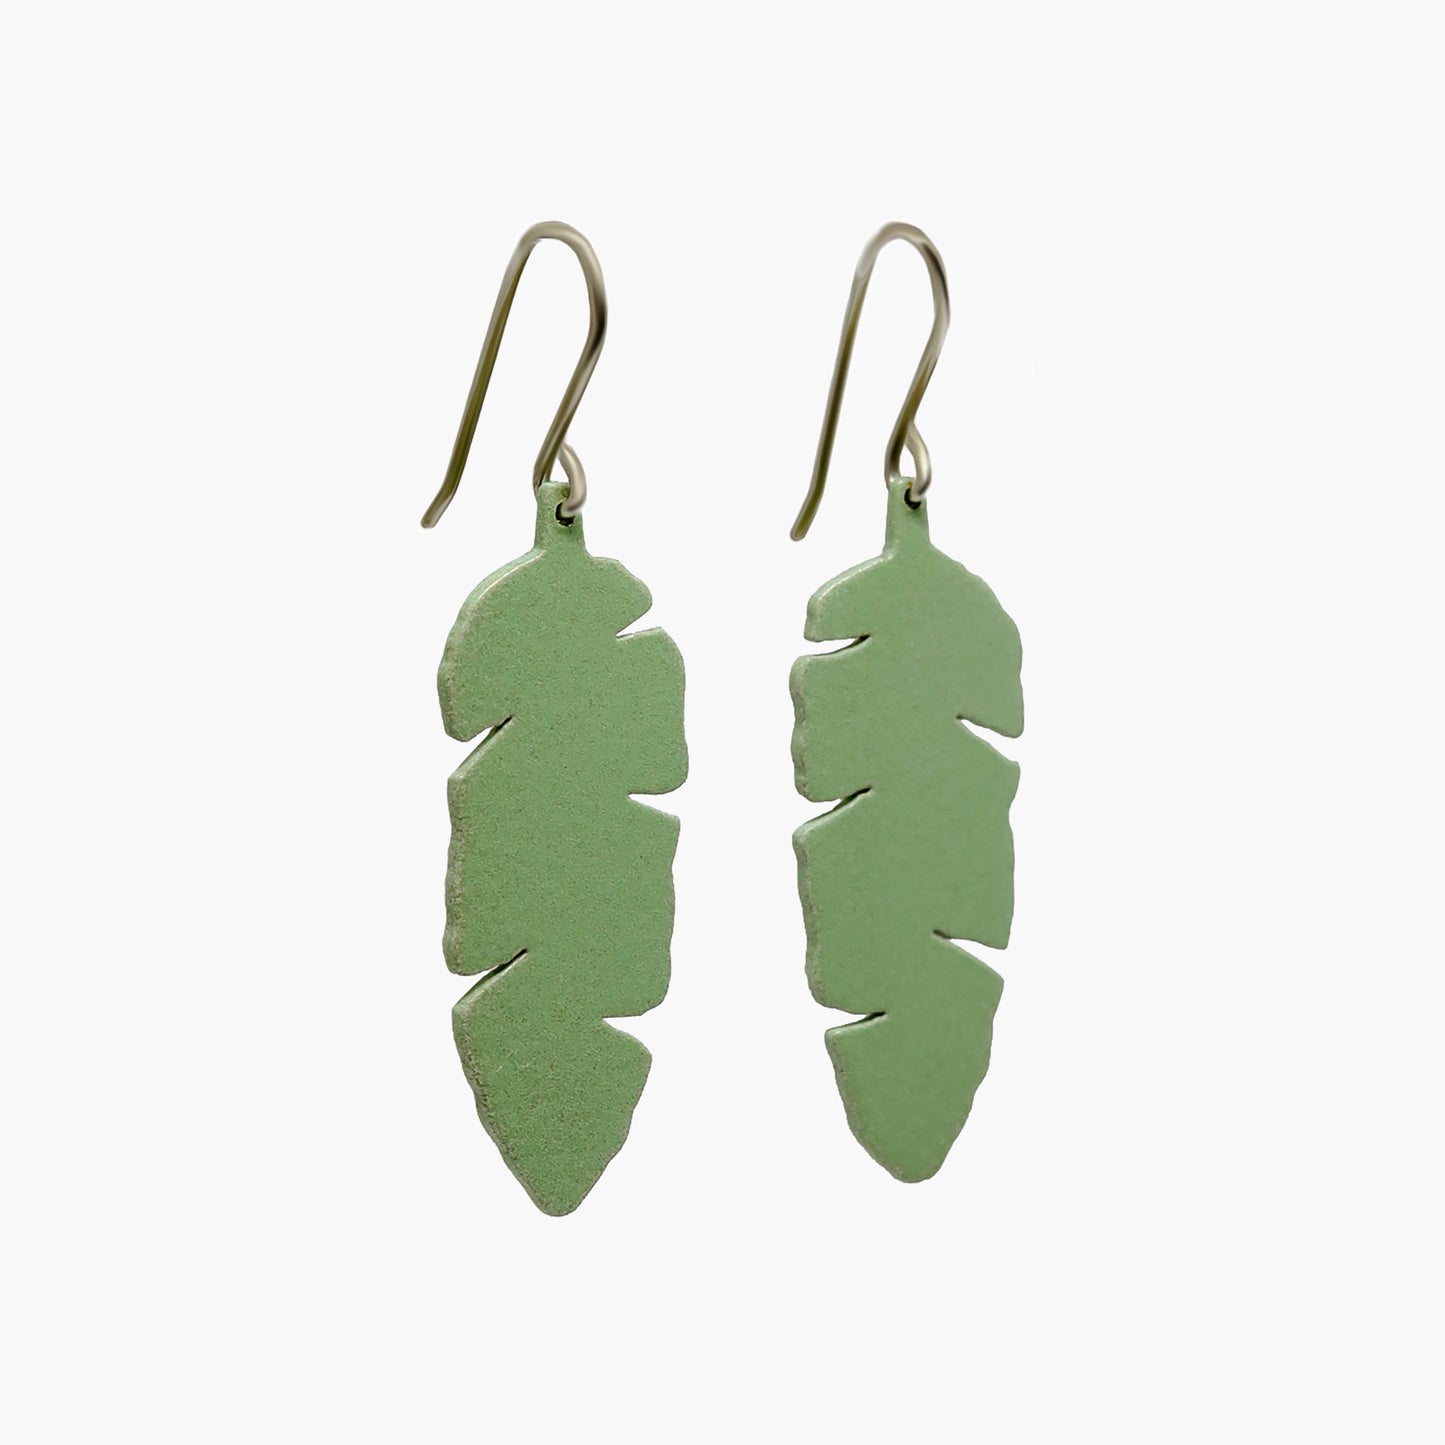 Pair of pale green drop earrings with a unique banana leaf silhouette. The earrings are made of a glossy, lightweight material and hang delicately from silver hooks. The leaf-like shape features curved edges and a pointed tip, creating a natural and organic aesthetic. These earrings are perfect for adding a touch of tropical flair to any outfit.